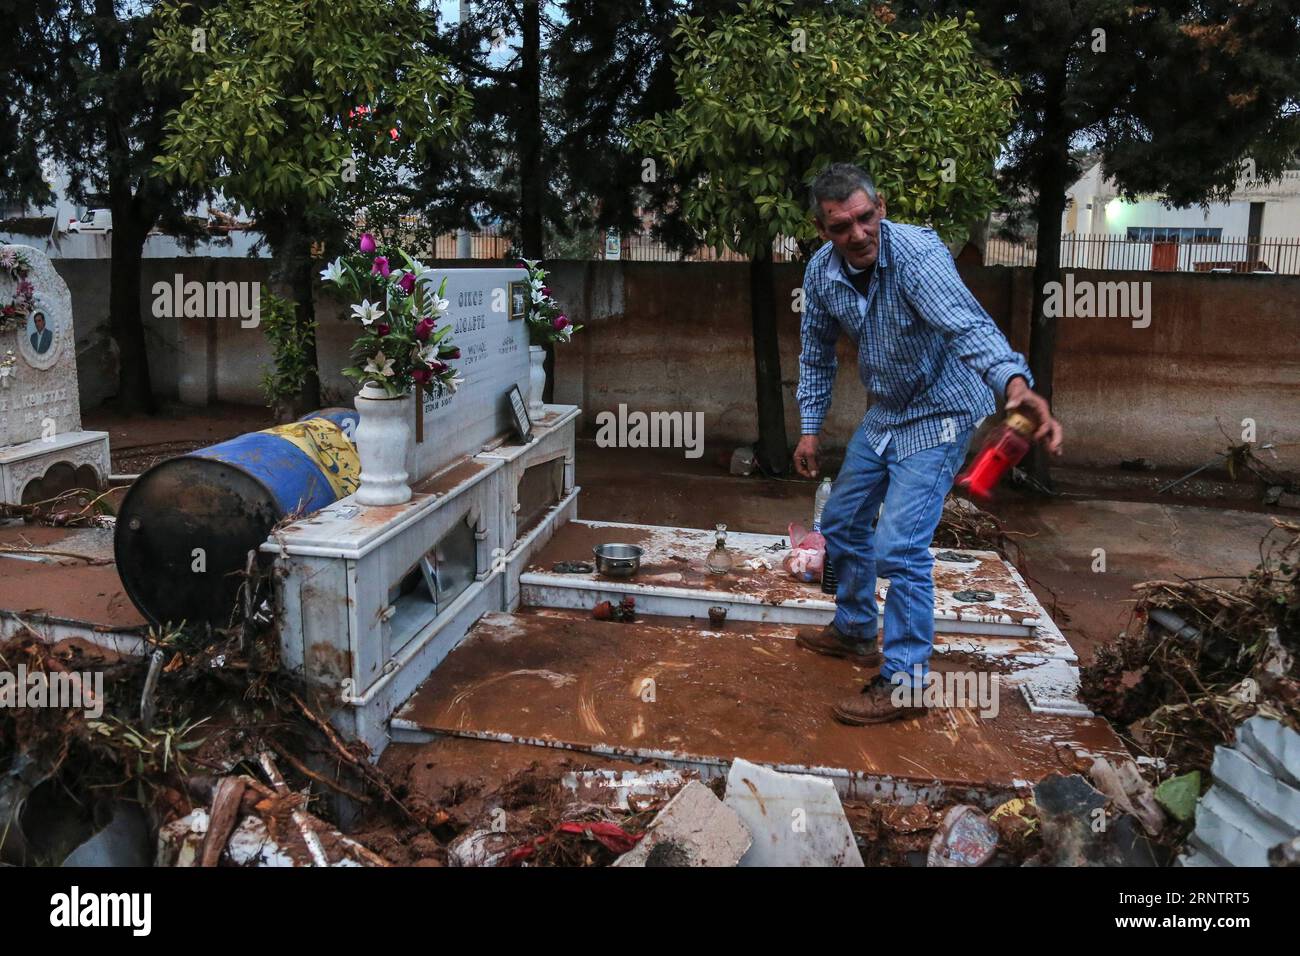 (171117) -- ATHENS, Nov. 17, 2017 -- A man cleans a grave in a damaged cemetery after the flash flooding in Mandra, Greece on Nov. 16, 2017. The strong torrential downpour which turned roads into muddy rivers in the municipalities of Mandra, Nea Peramos and Megara, about 20 kilometers west of the Greek capital, has claimed 16 lives, according to the latest official count. )(swt) GREECE-ATHENS-FLOODING LefterisxPartsalis PUBLICATIONxNOTxINxCHN Stock Photo